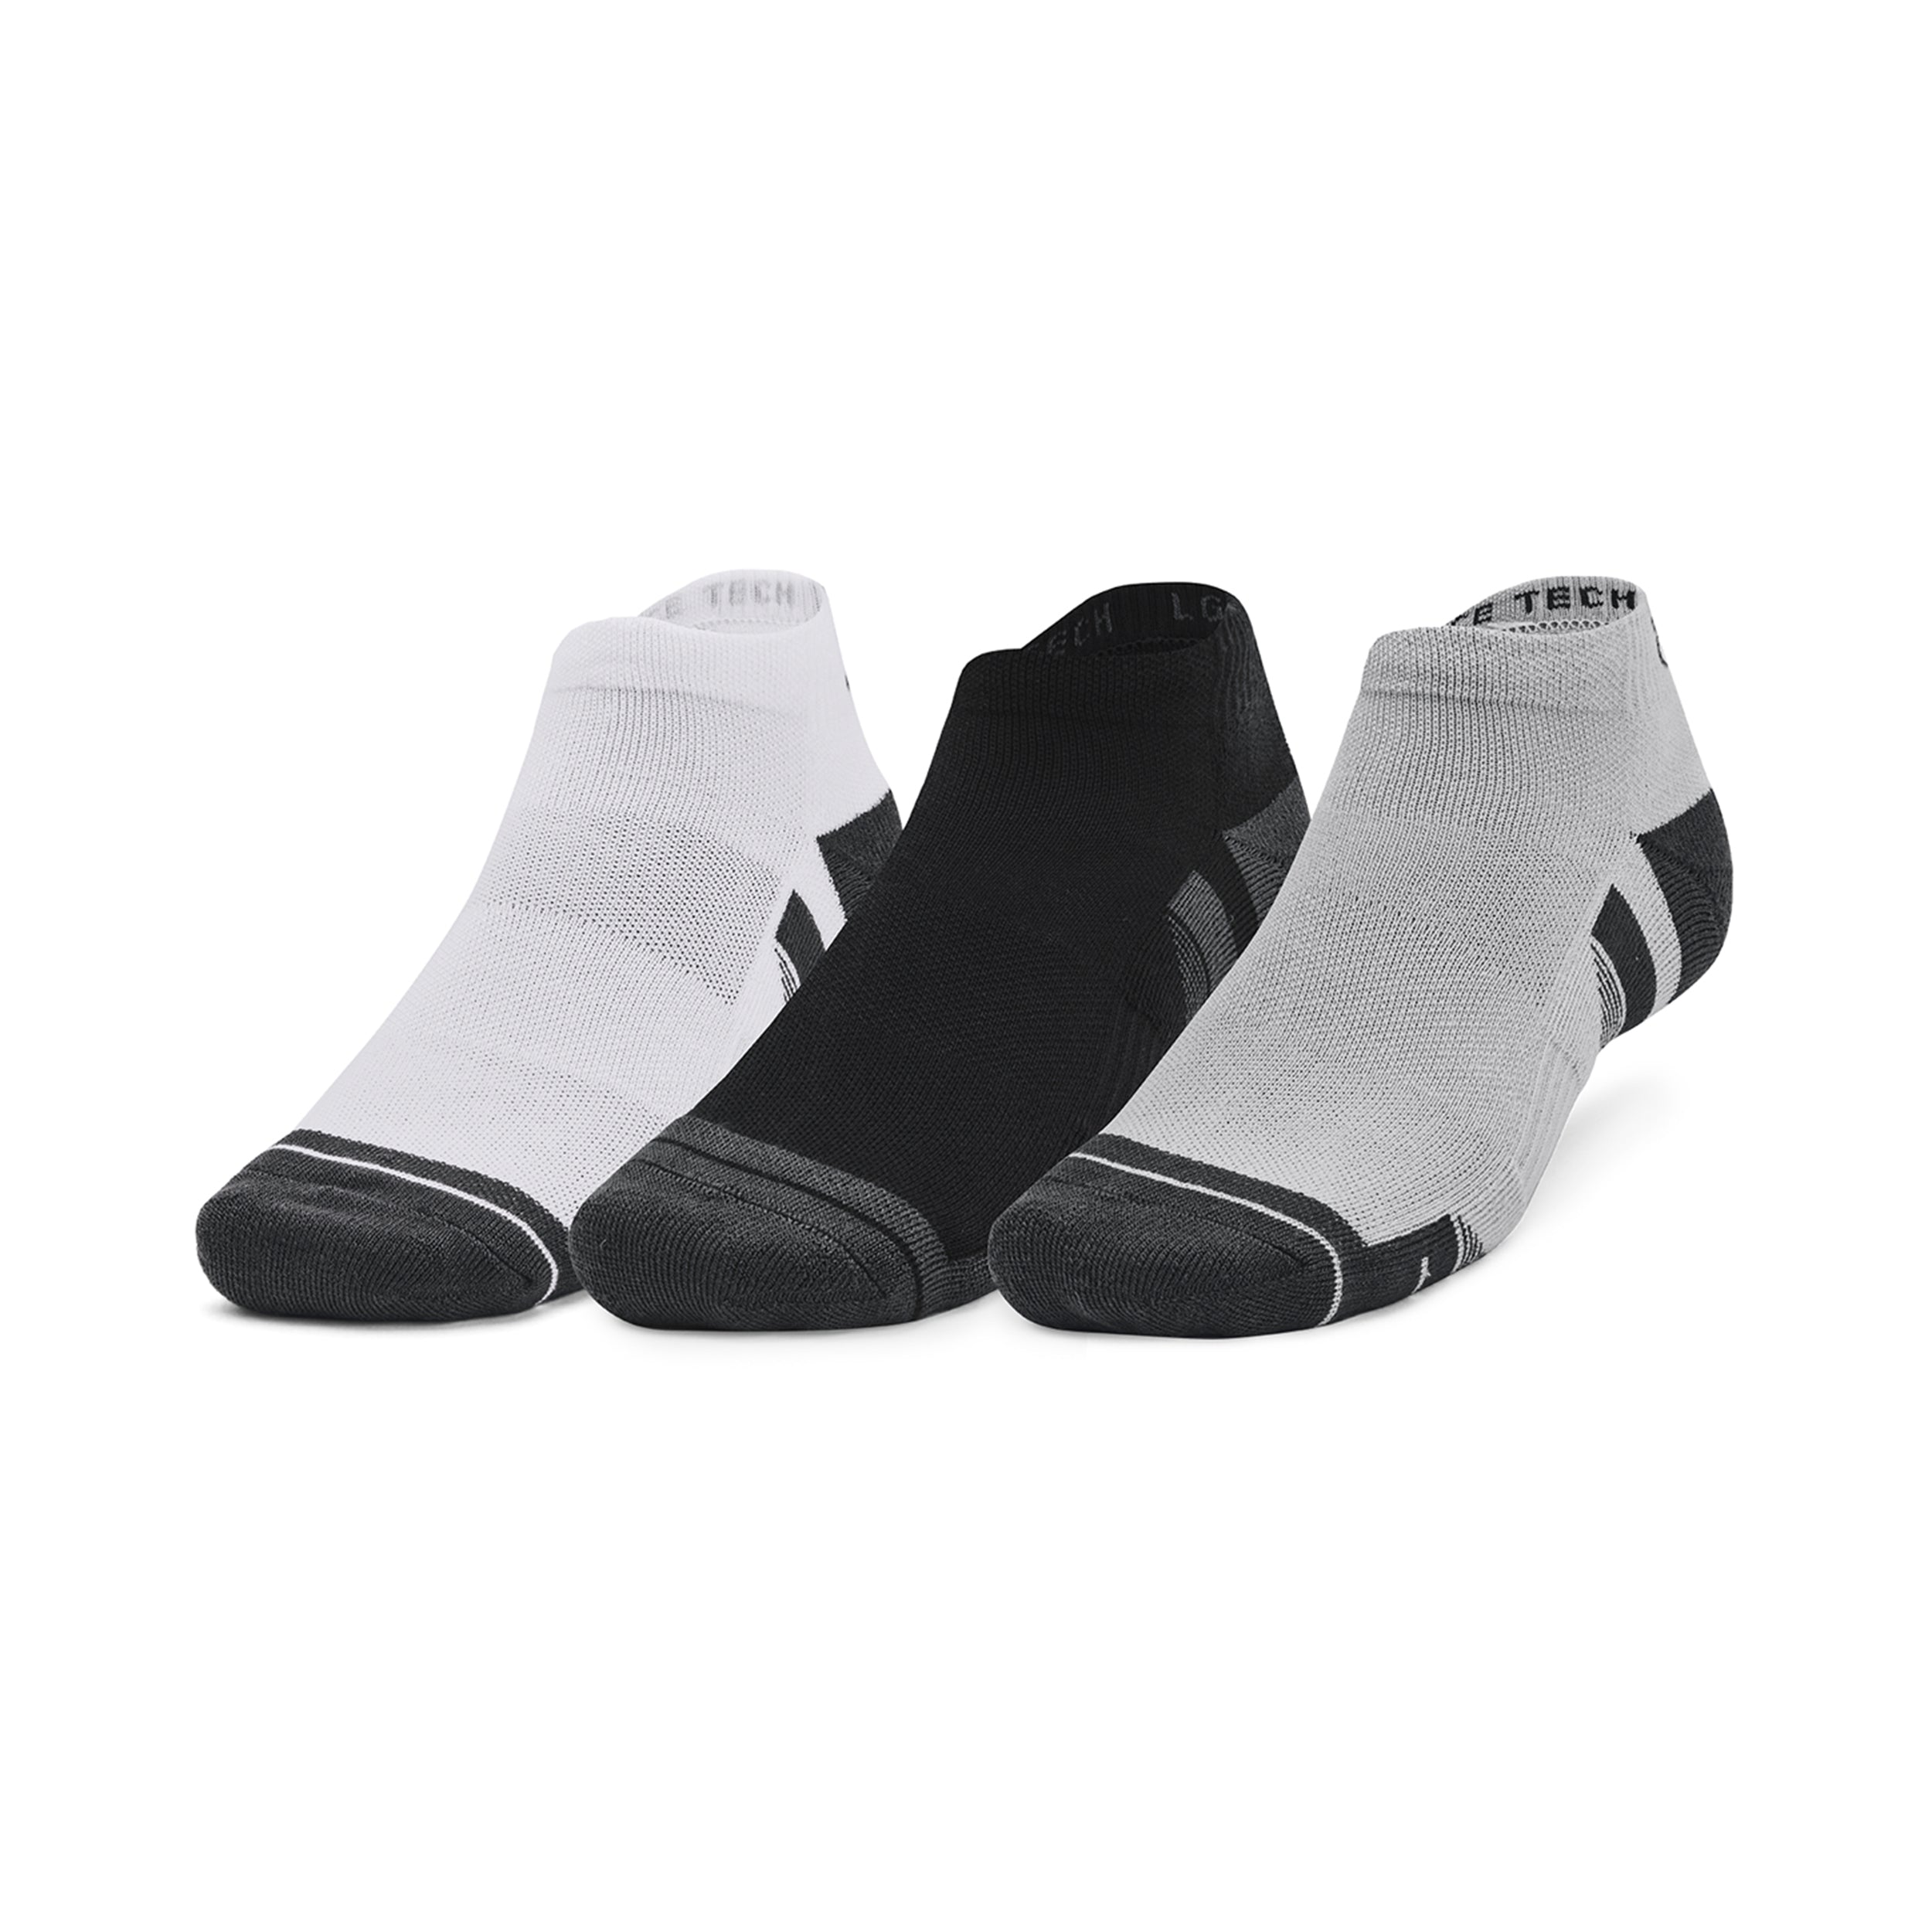 Under Armour Golf Performance Tech Low Sock - 3 Pack 1379504 Multi 011 ...